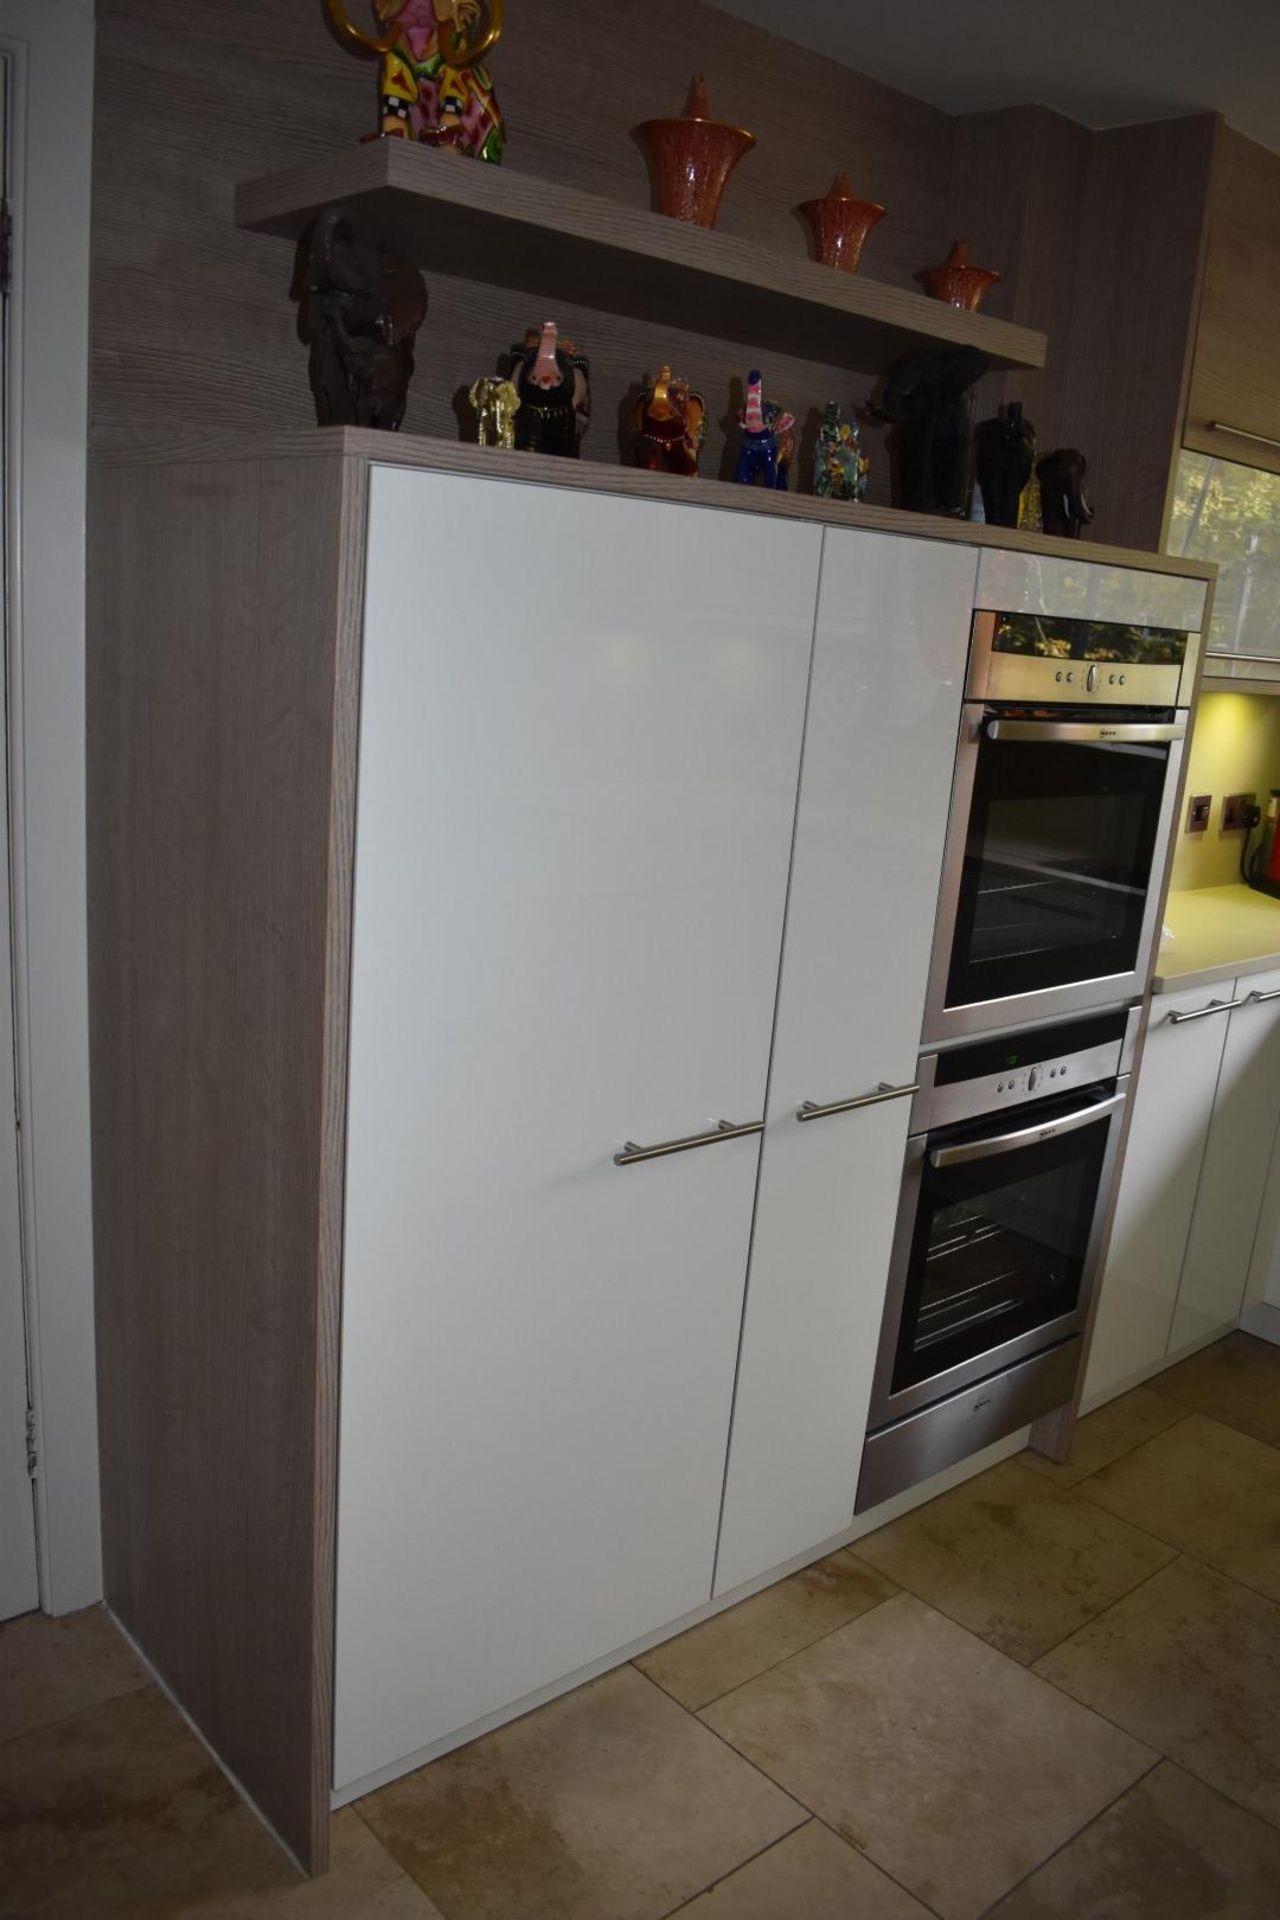 1 x Pronorm Einbauküchen German Made Fitted Kitchen With Contemporary High Gloss Cream Doors and - Image 9 of 51